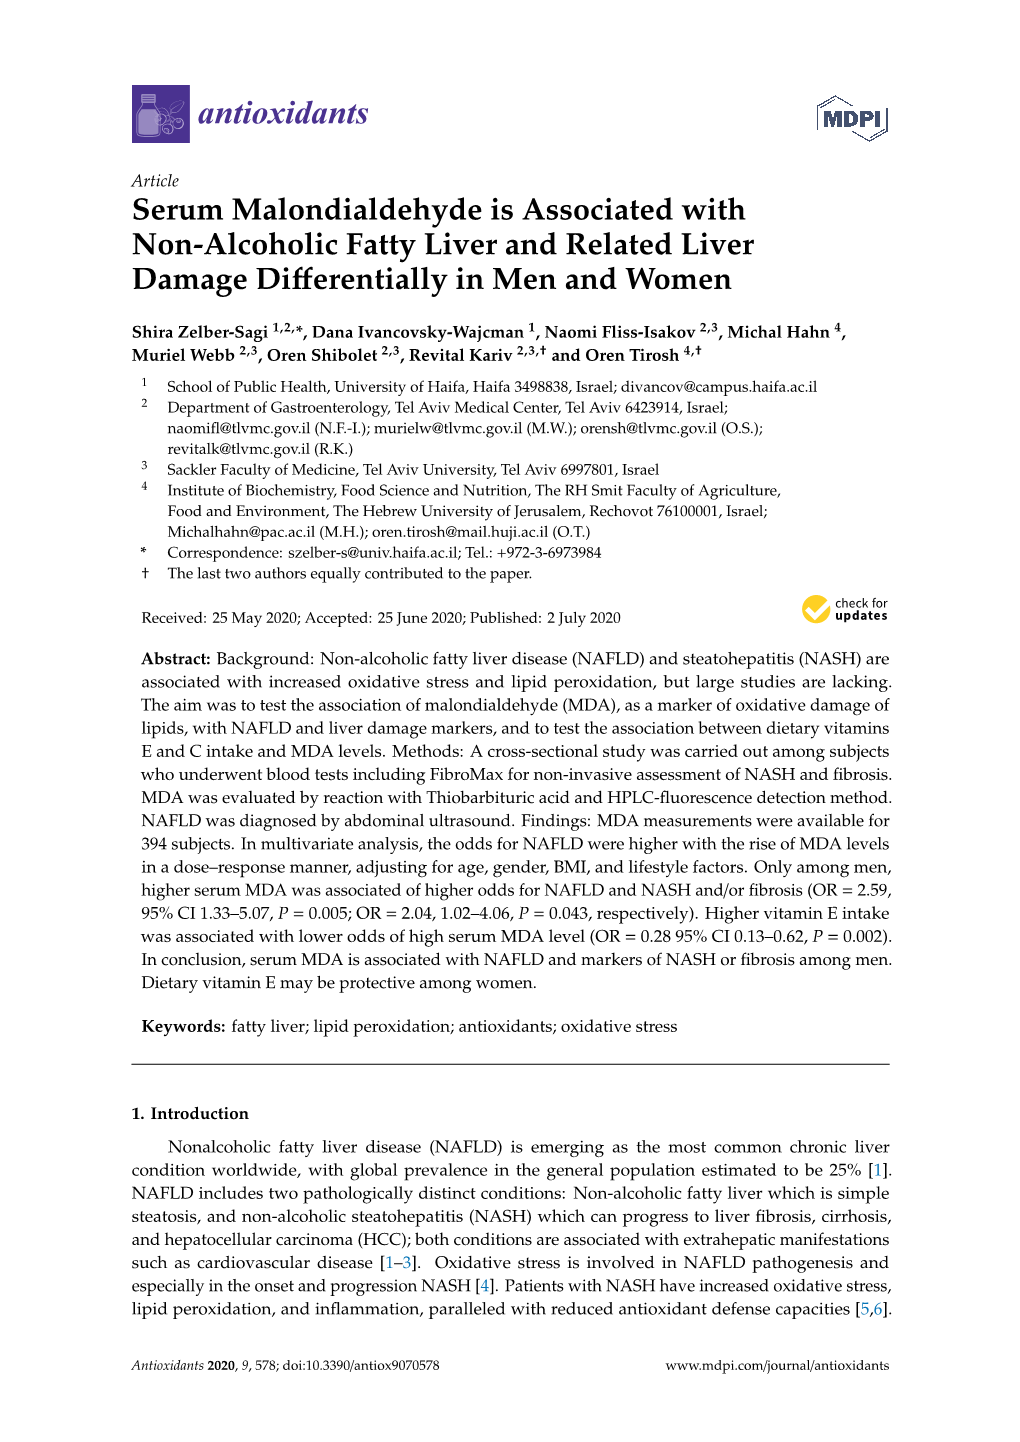 Serum Malondialdehyde Is Associated with Non-Alcoholic Fatty Liver and Related Liver Damage Diﬀerentially in Men and Women